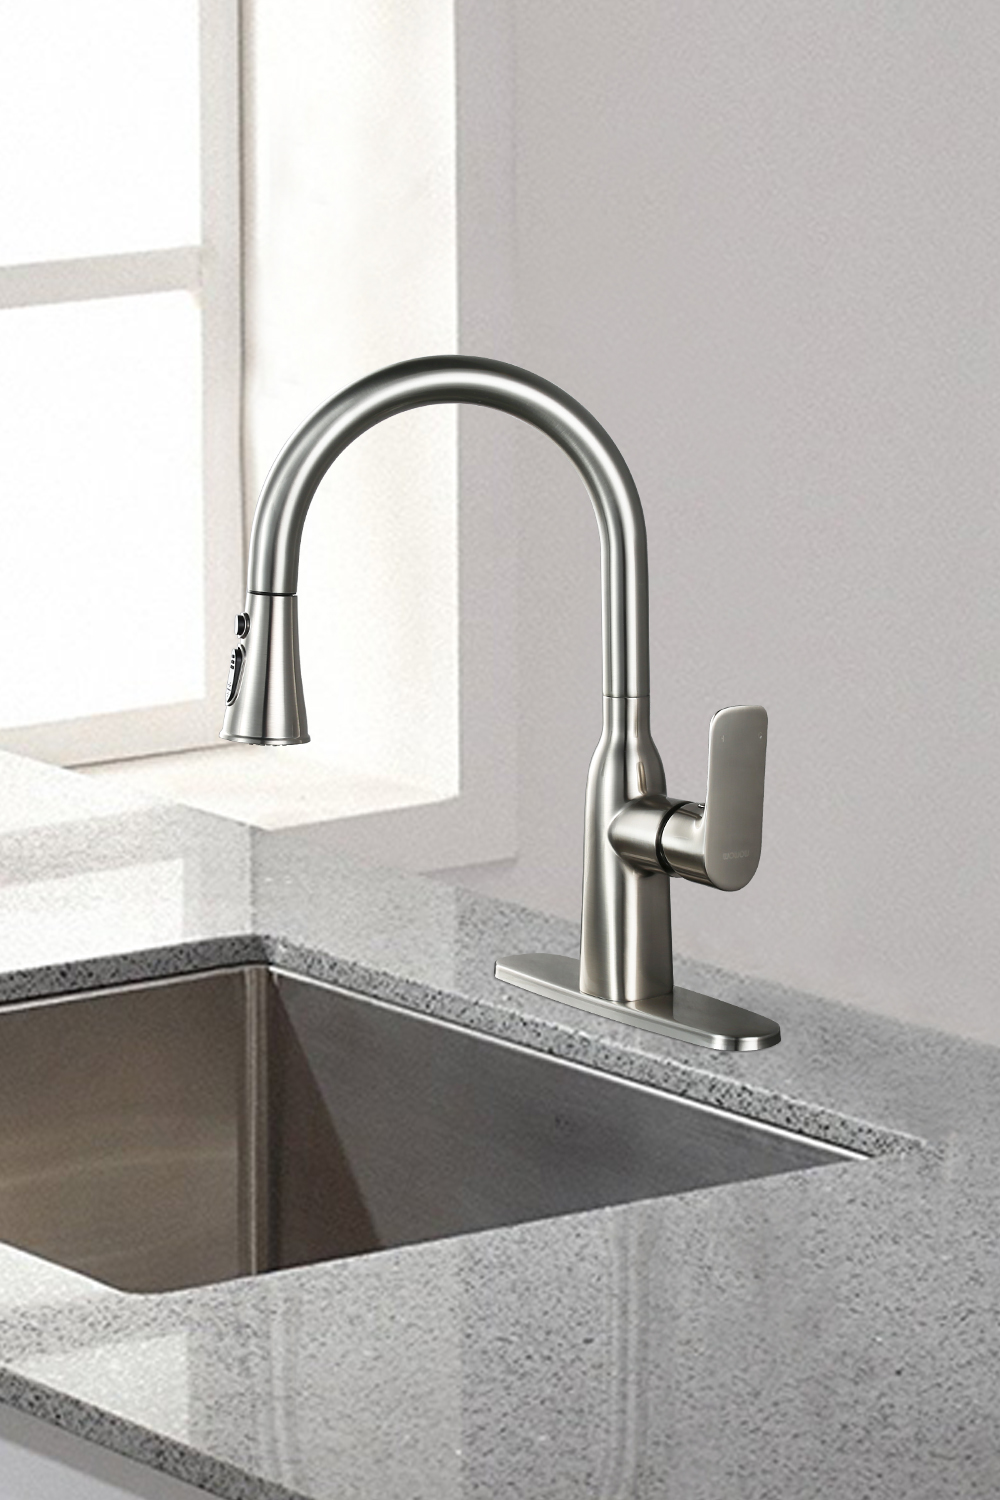 Taiwan's new faucet standard is released, stipulating that the upper limit of lead in faucets is 0.25%